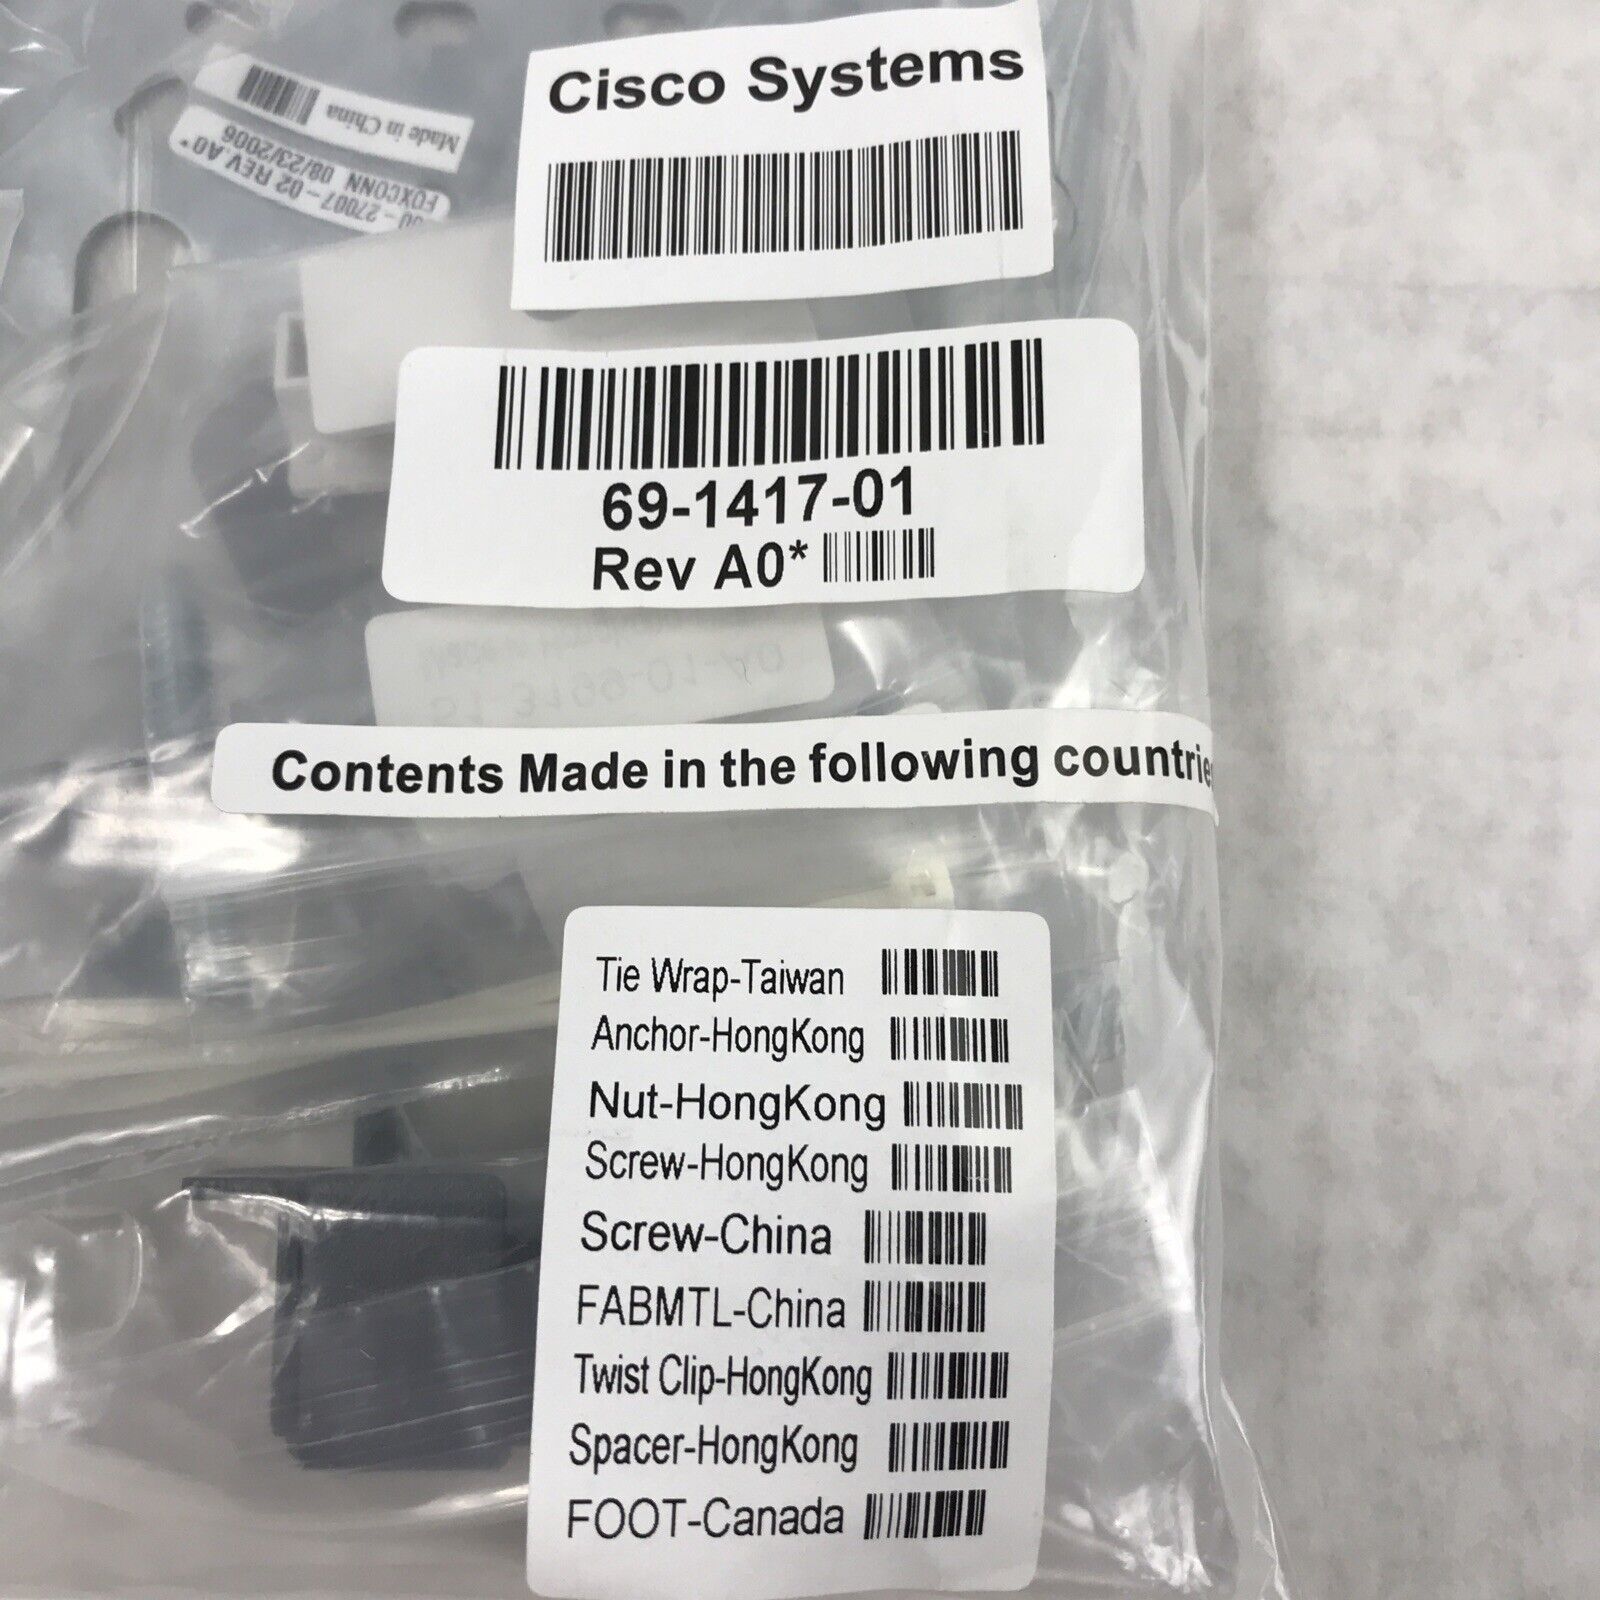 Cisco 69-1417-01 Aironet1240ag Mounting Hardware Complete